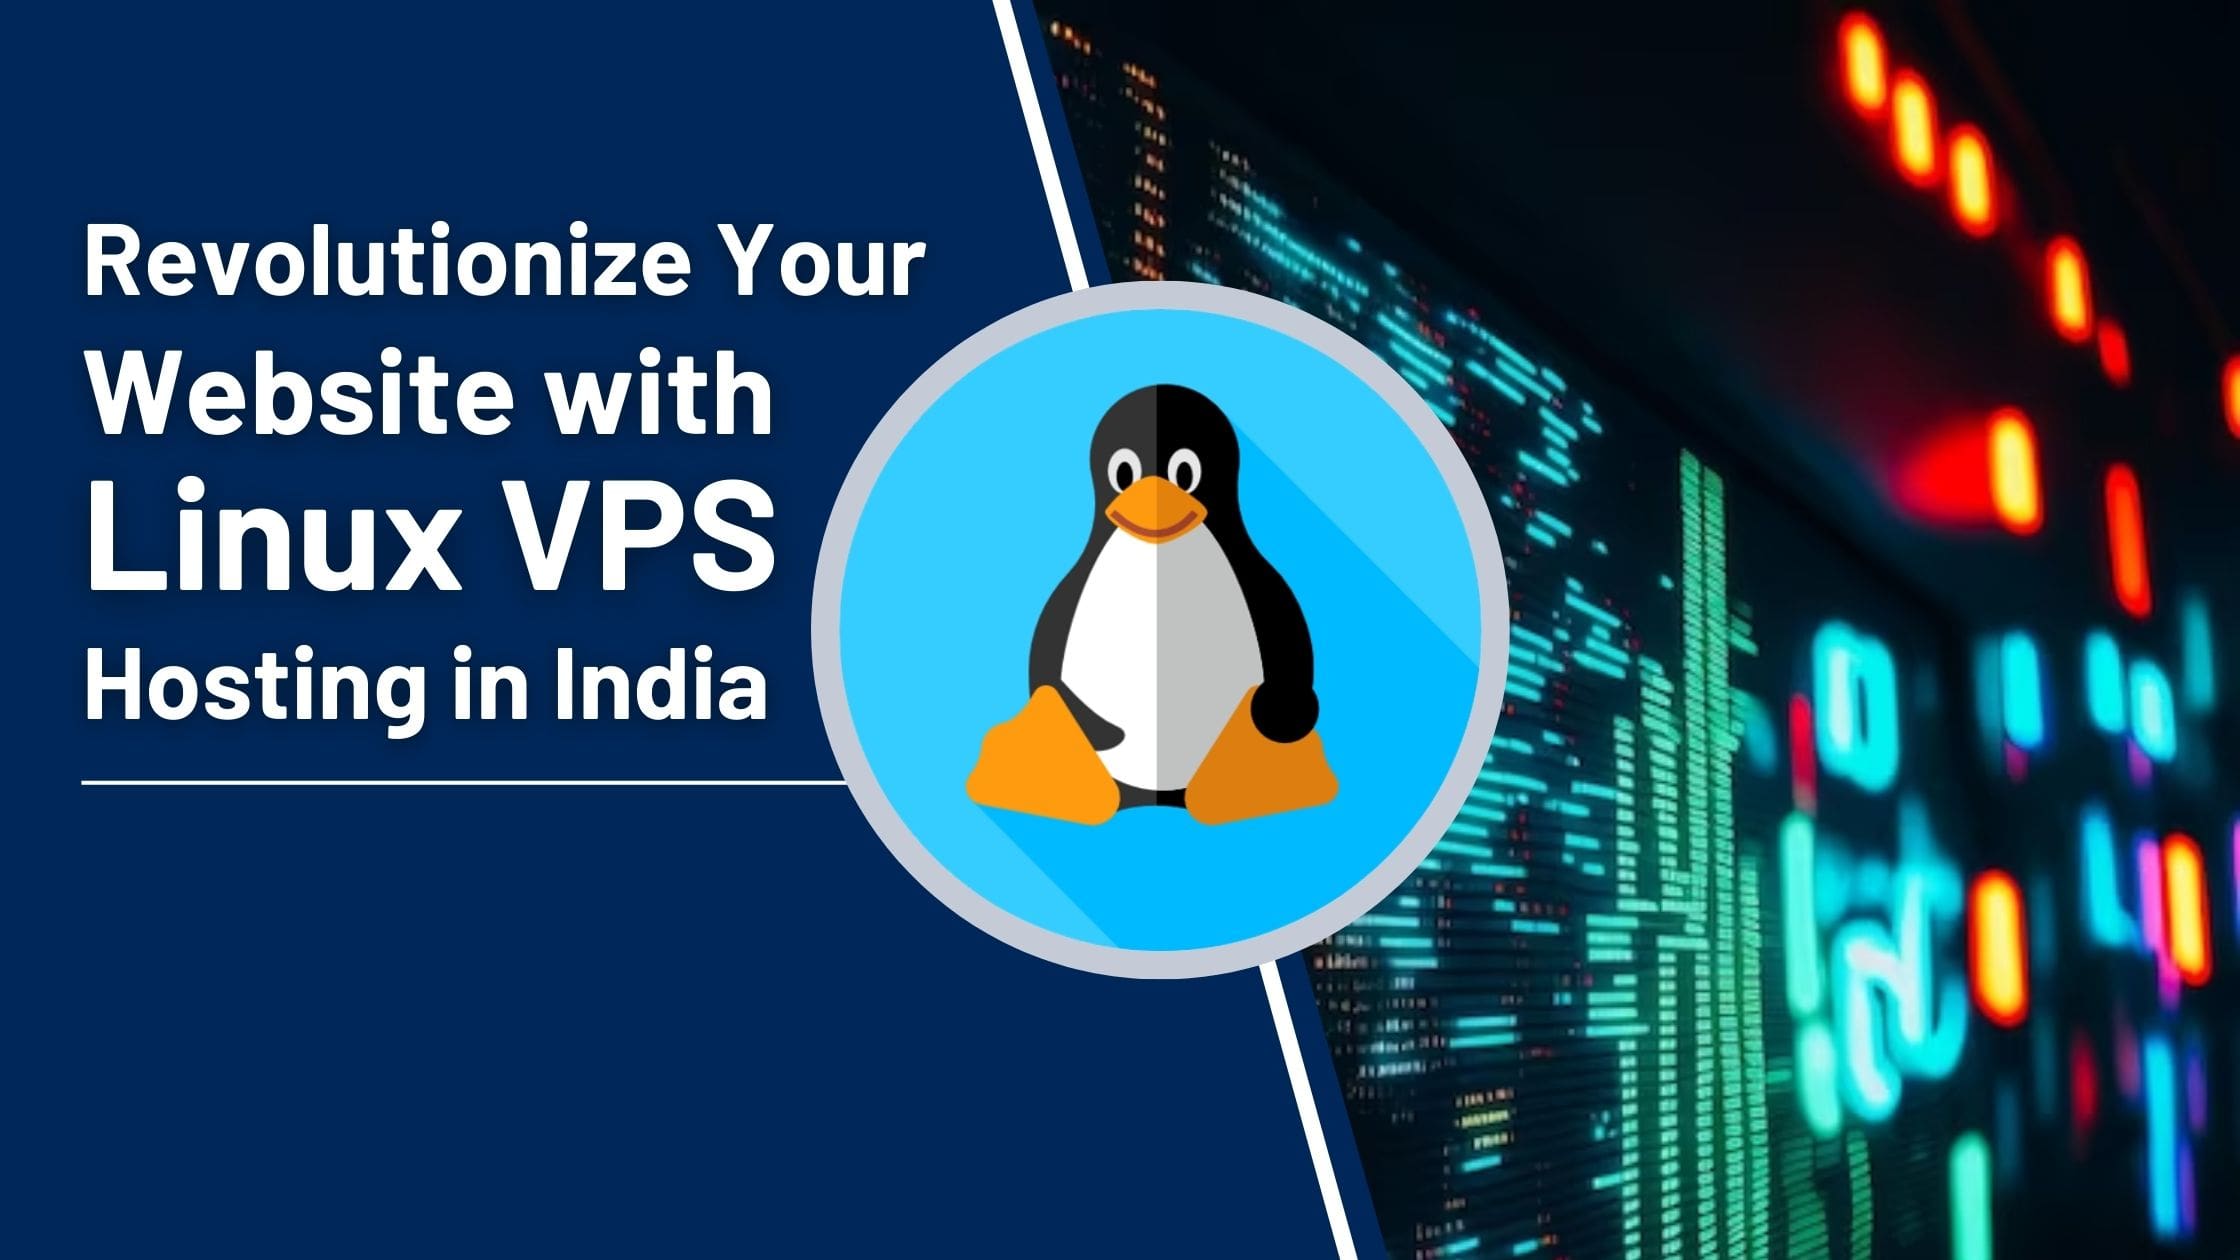 Revolutionize Your Website with Linux VPS Hosting in India